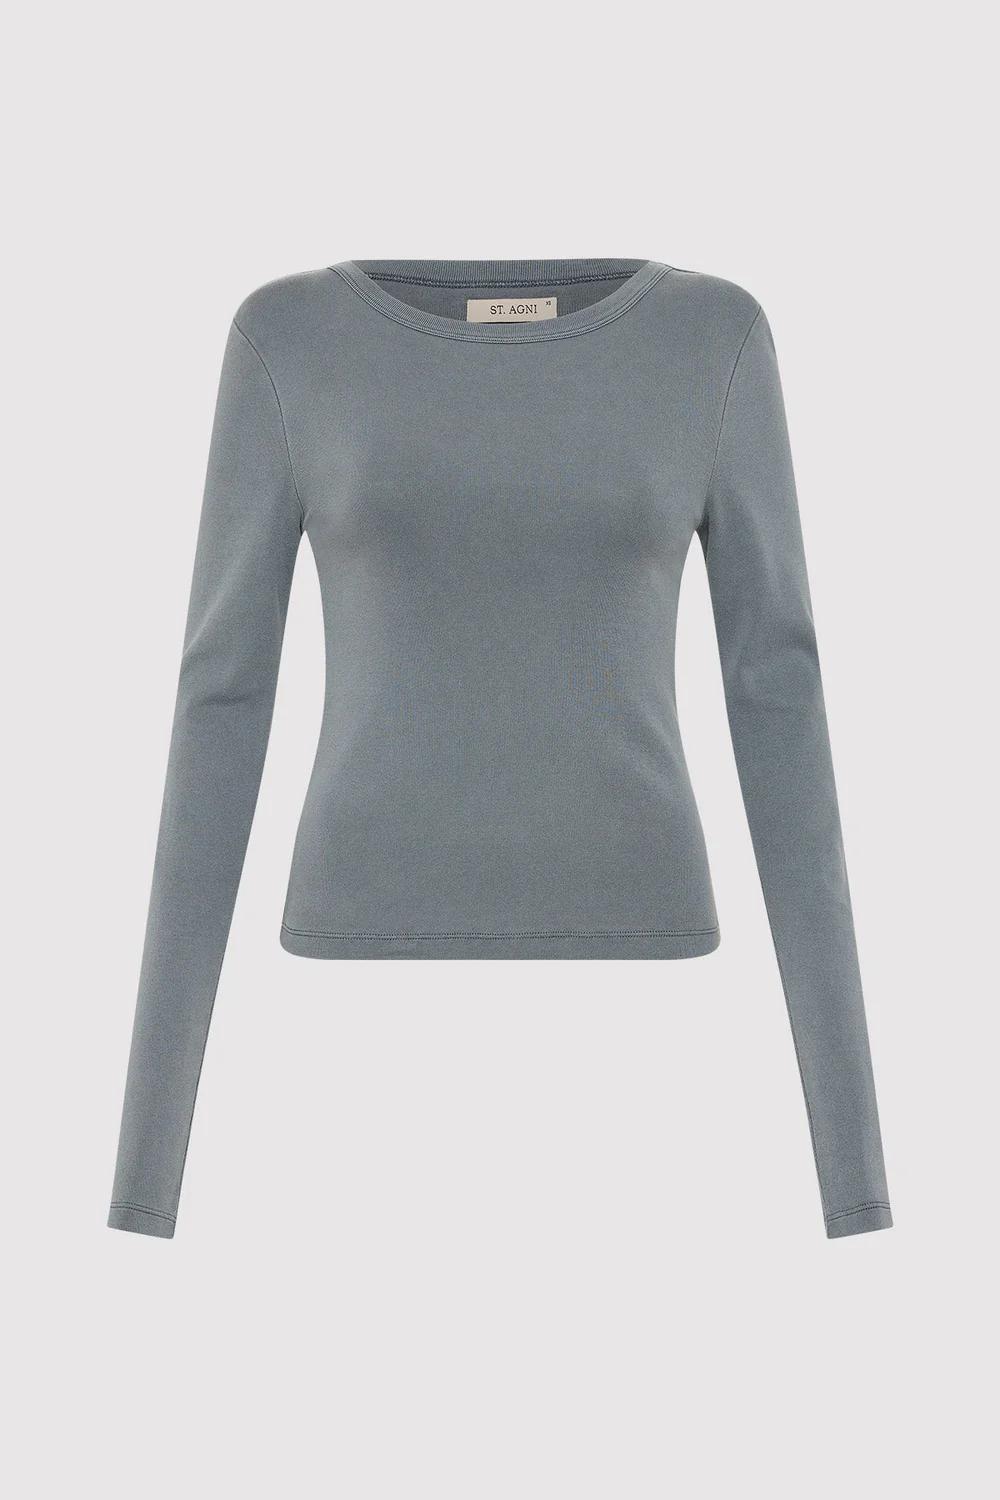 Product Image for Organic Cotton Long Sleeve Top, Diesel Grey